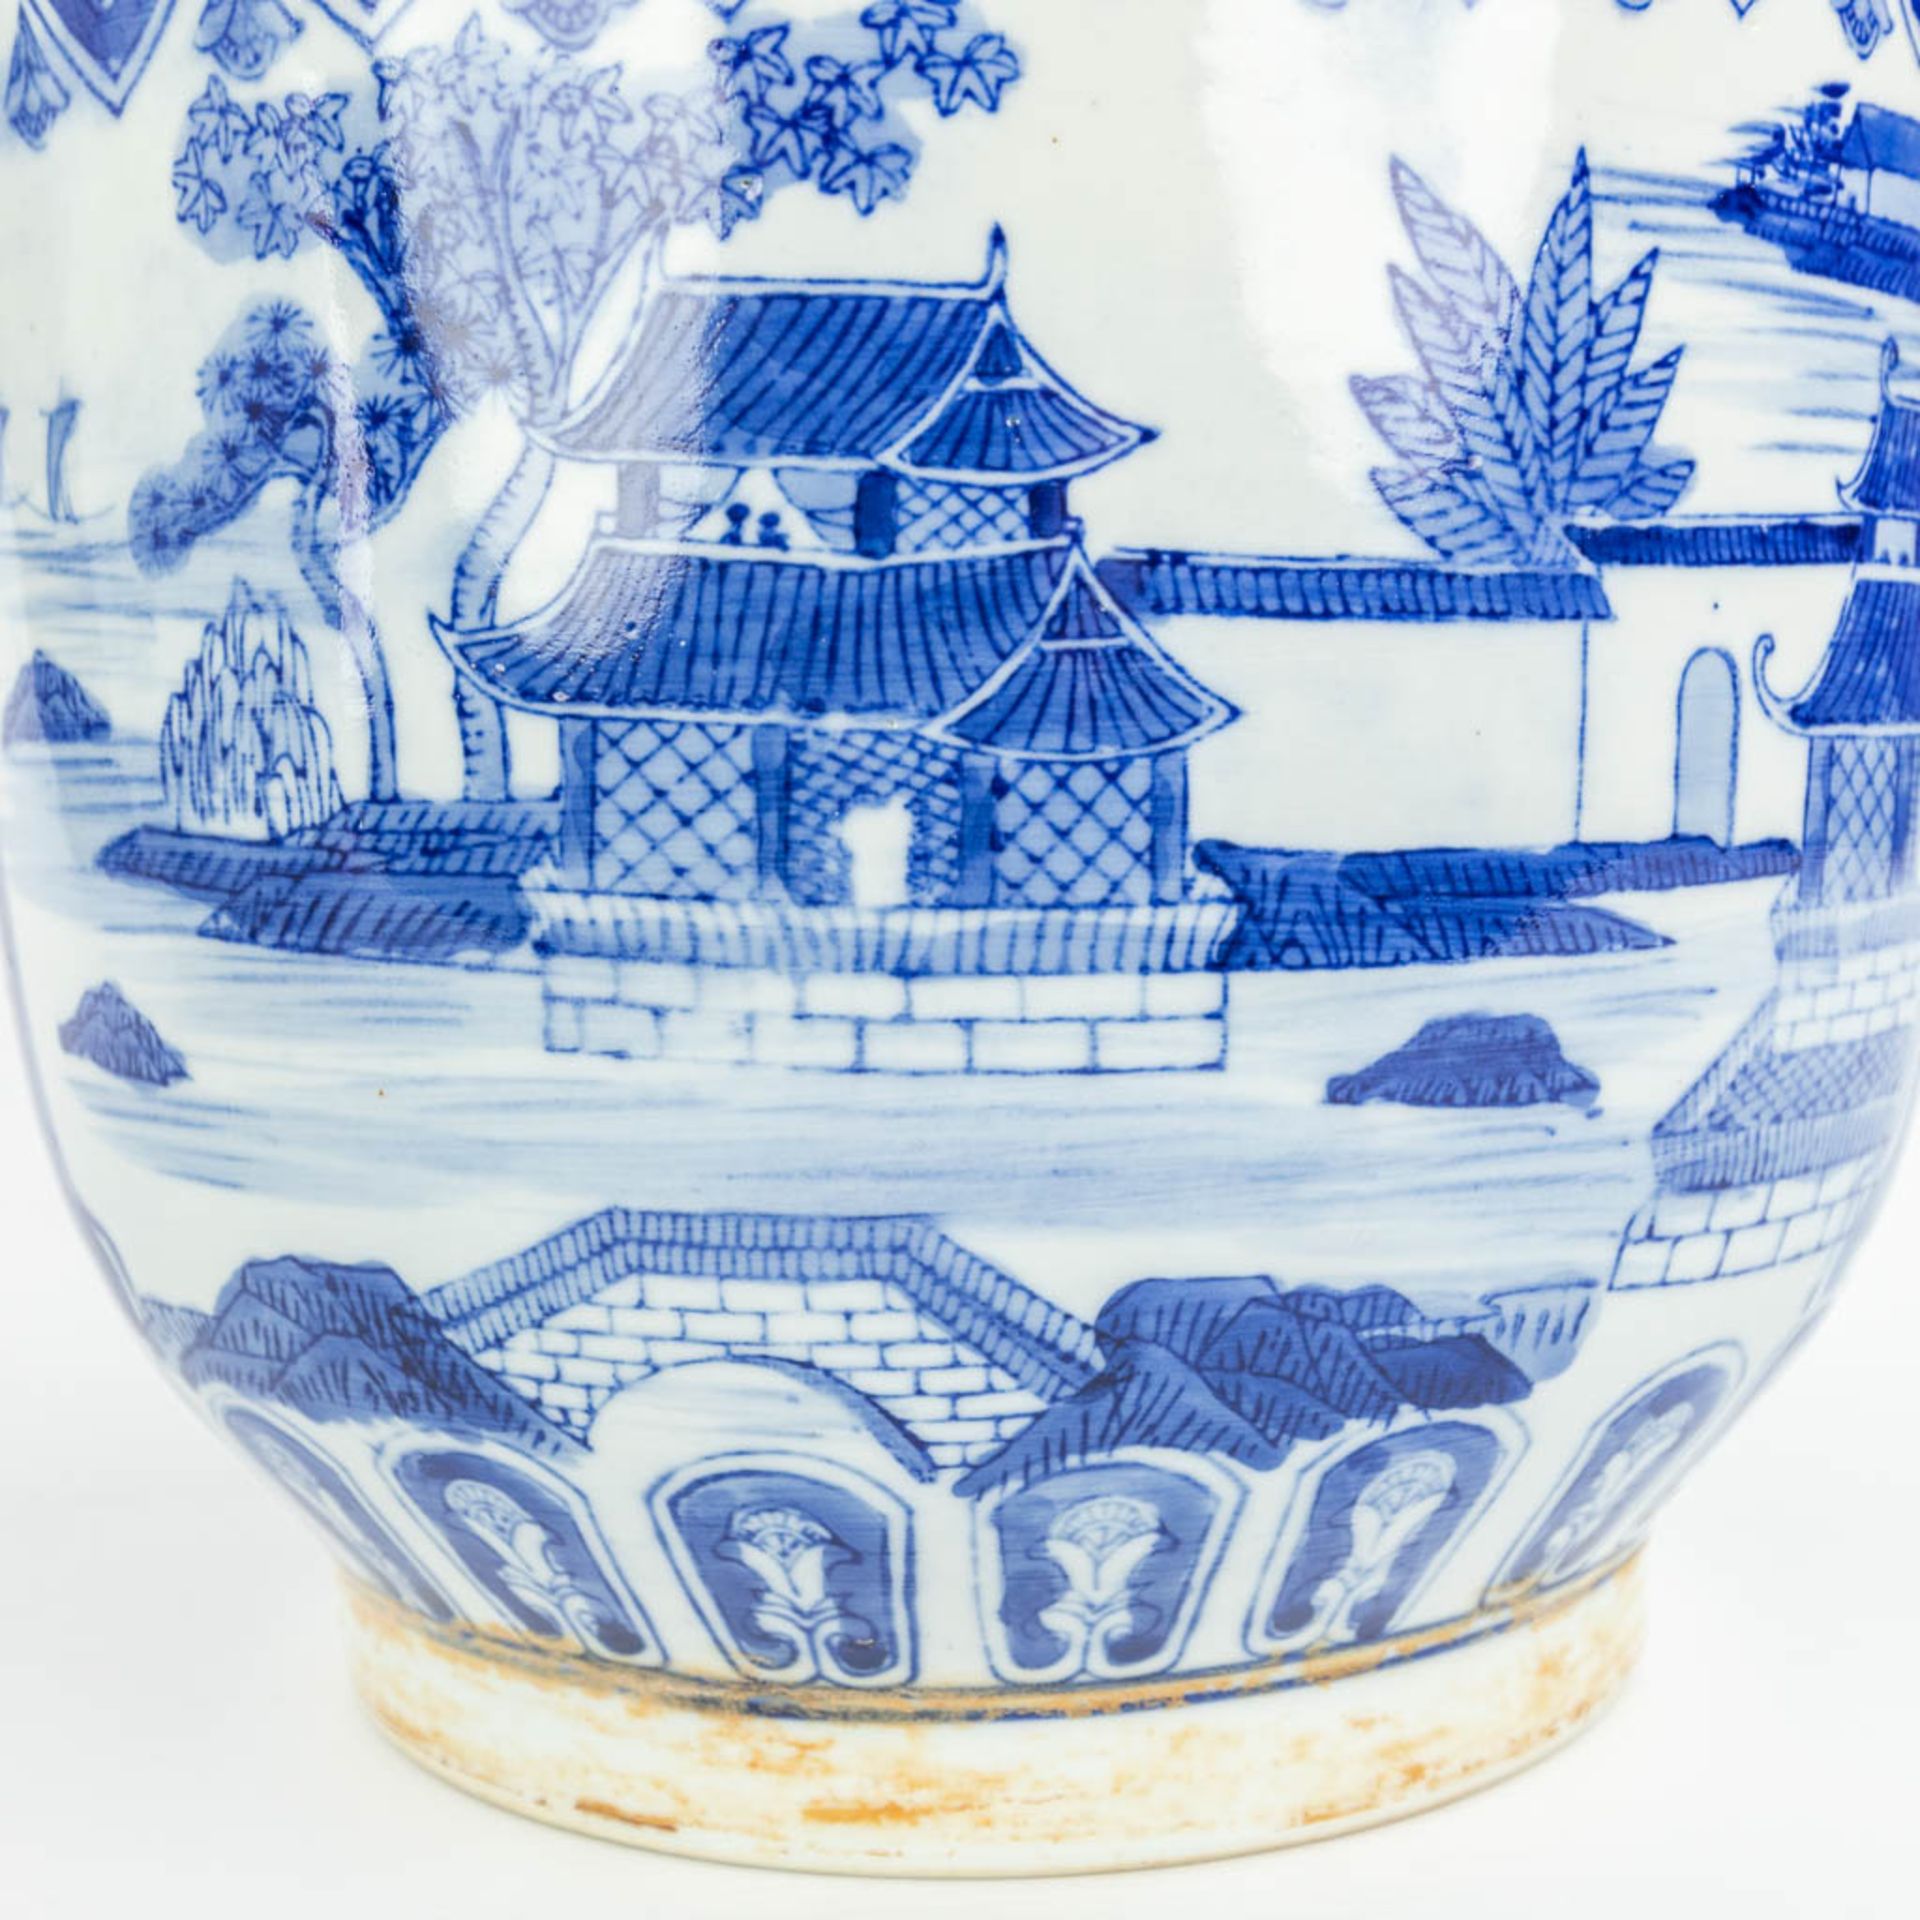 A set of 2 Chinese cache-pots made of porcelain of which 1 has a blue-white decor and the other a de - Image 13 of 15